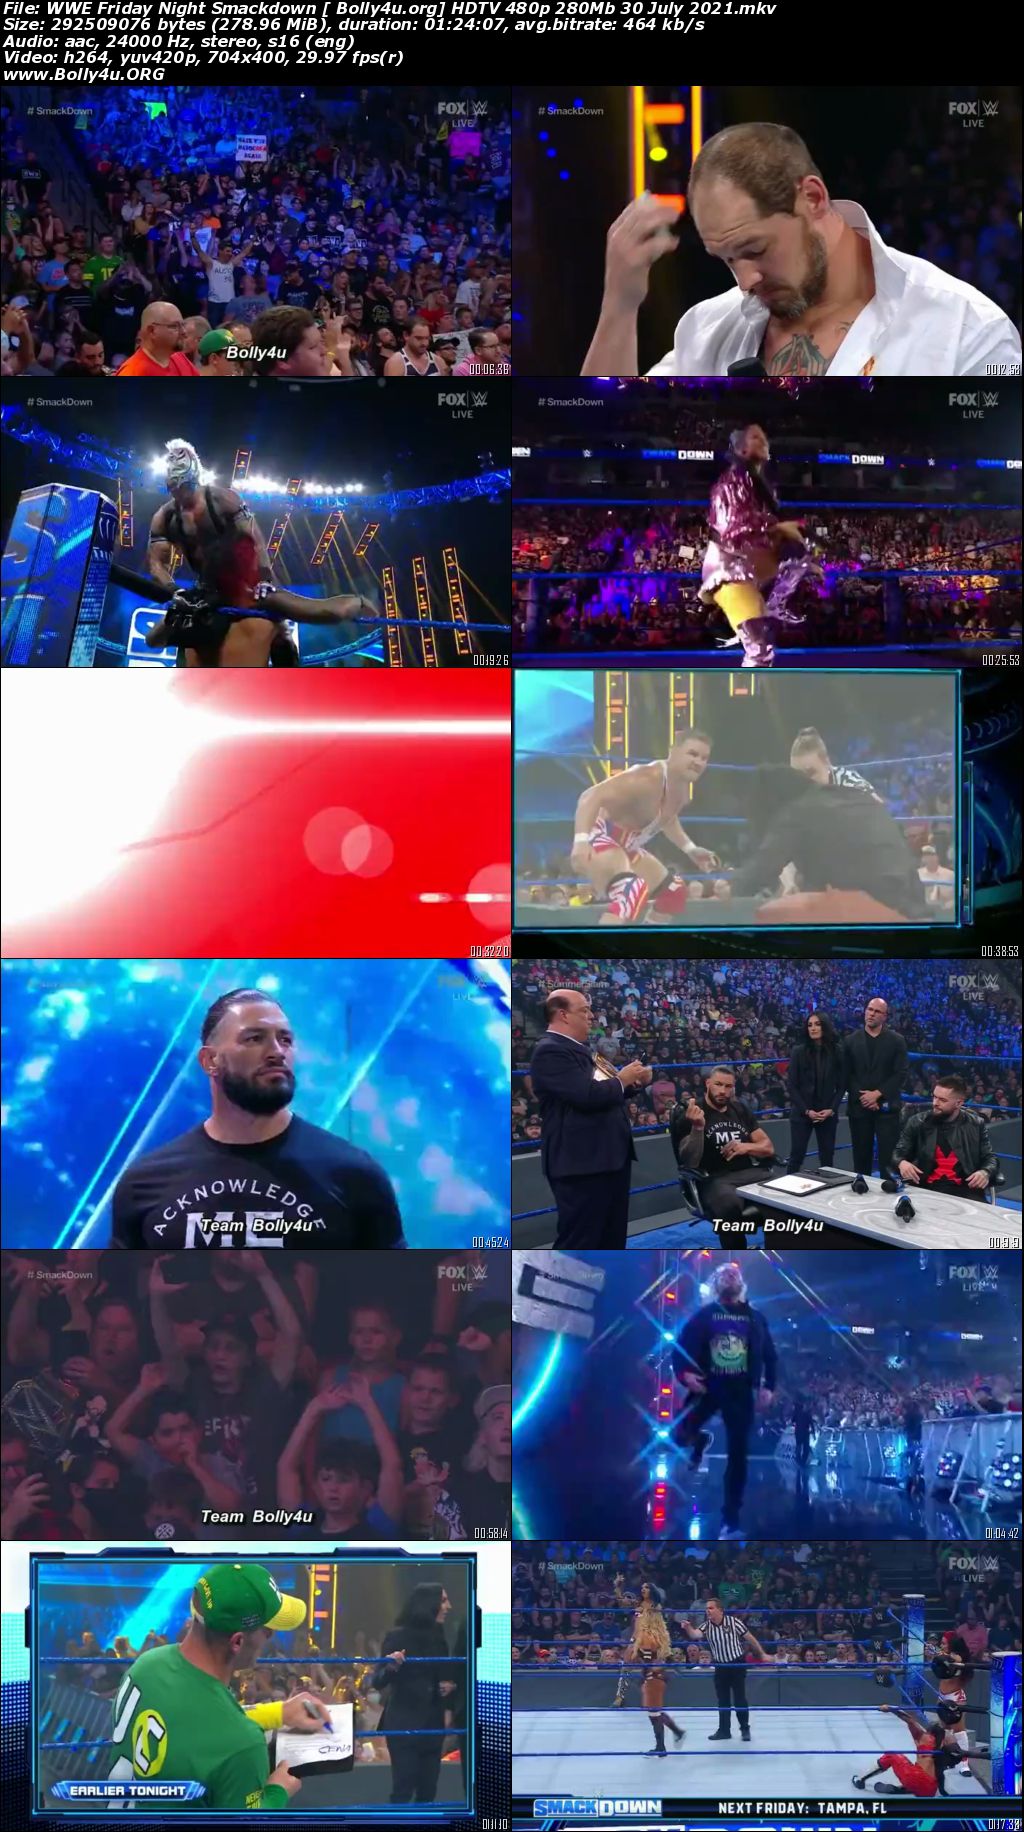 WWE Friday Night Smackdown HDTV 480p 280Mb 30 July 2021 Download